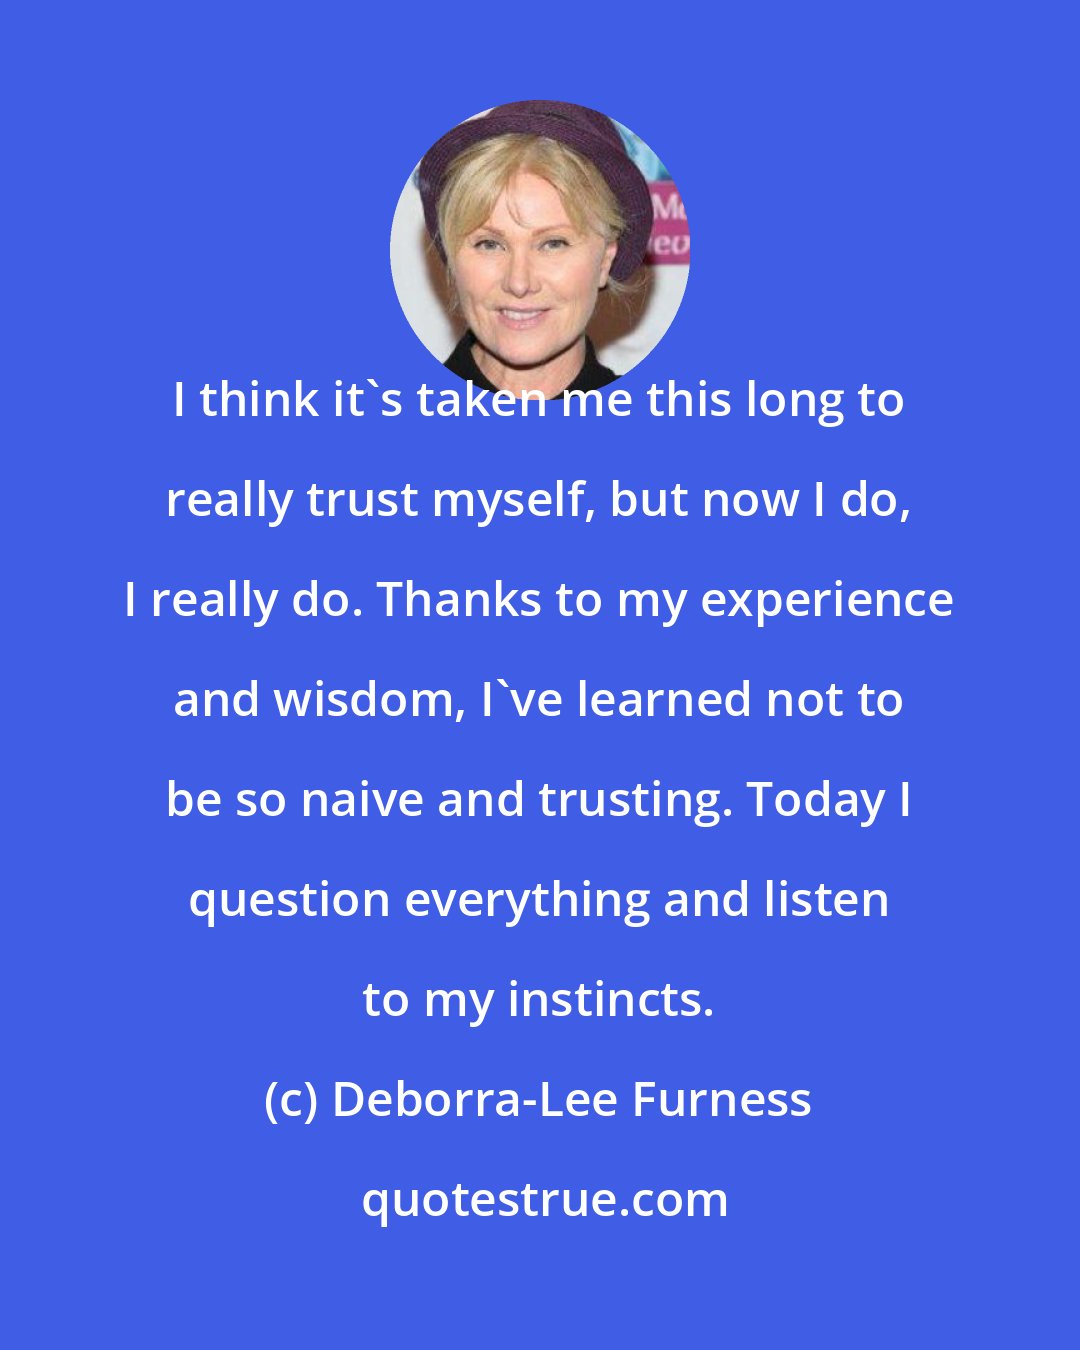 Deborra-Lee Furness: I think it's taken me this long to really trust myself, but now I do, I really do. Thanks to my experience and wisdom, I've learned not to be so naive and trusting. Today I question everything and listen to my instincts.